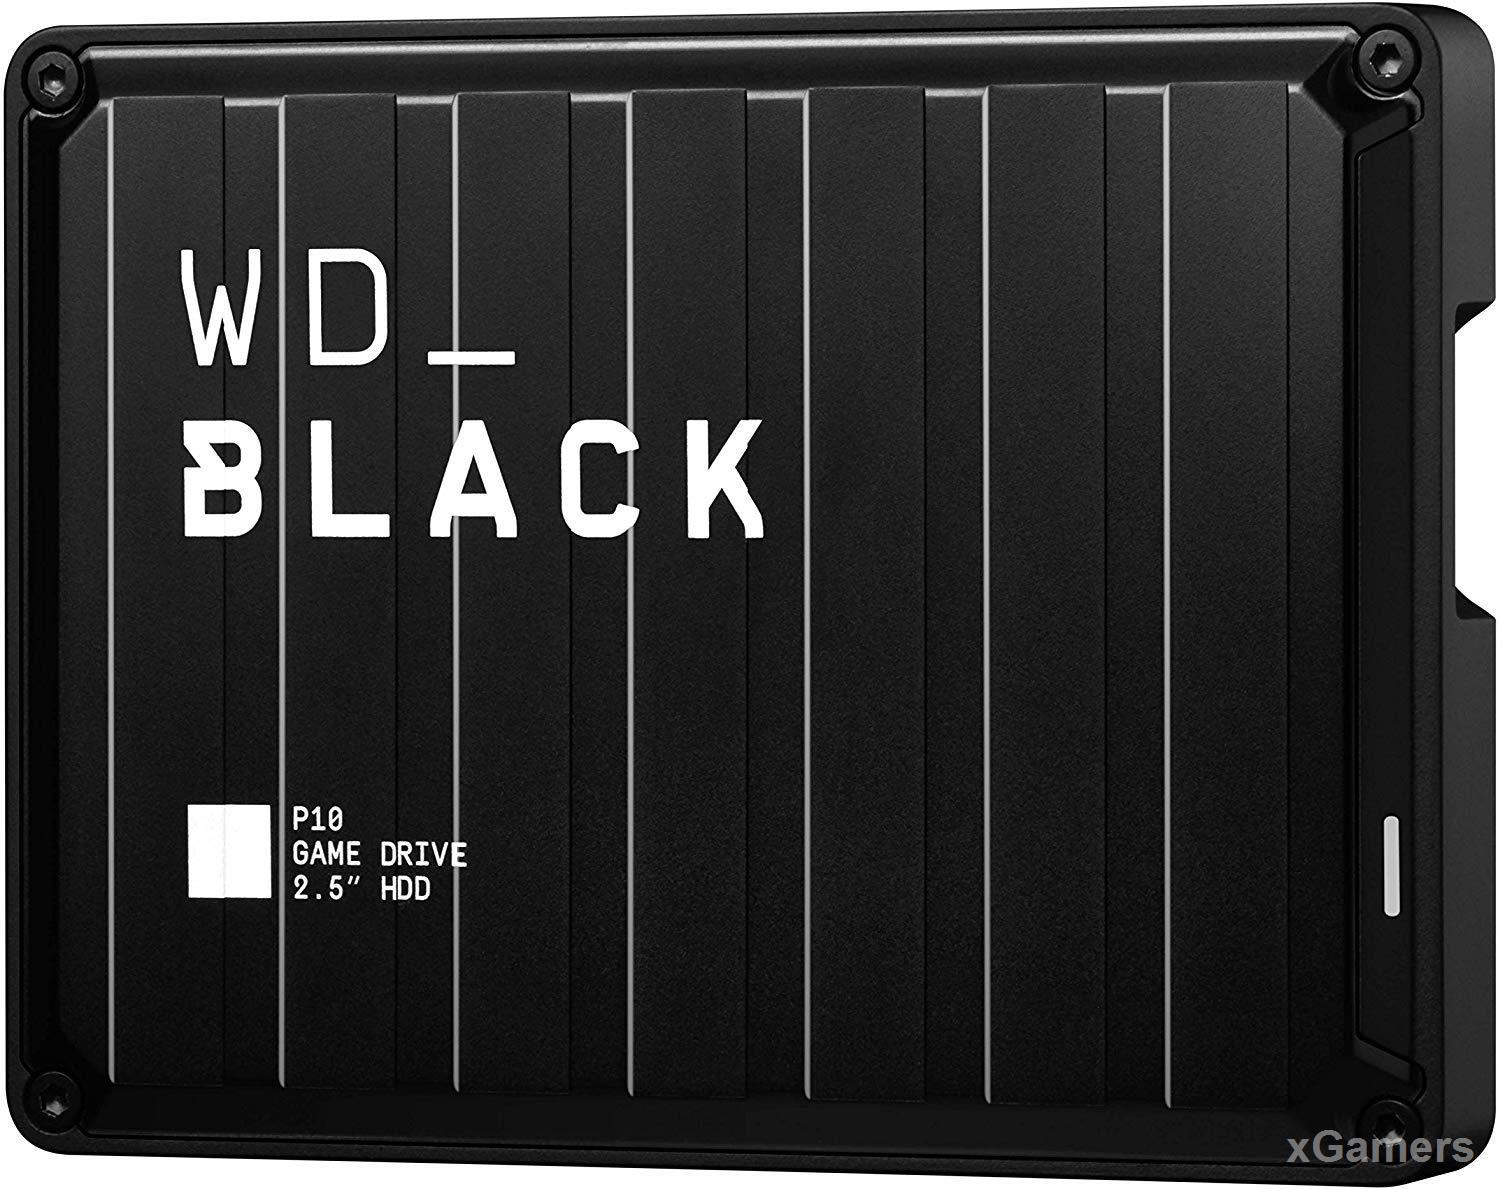 WD_Black 4TB P10 Game Drive, External Hard Drive Compatible with PS4, Xbox One, PC and Mac